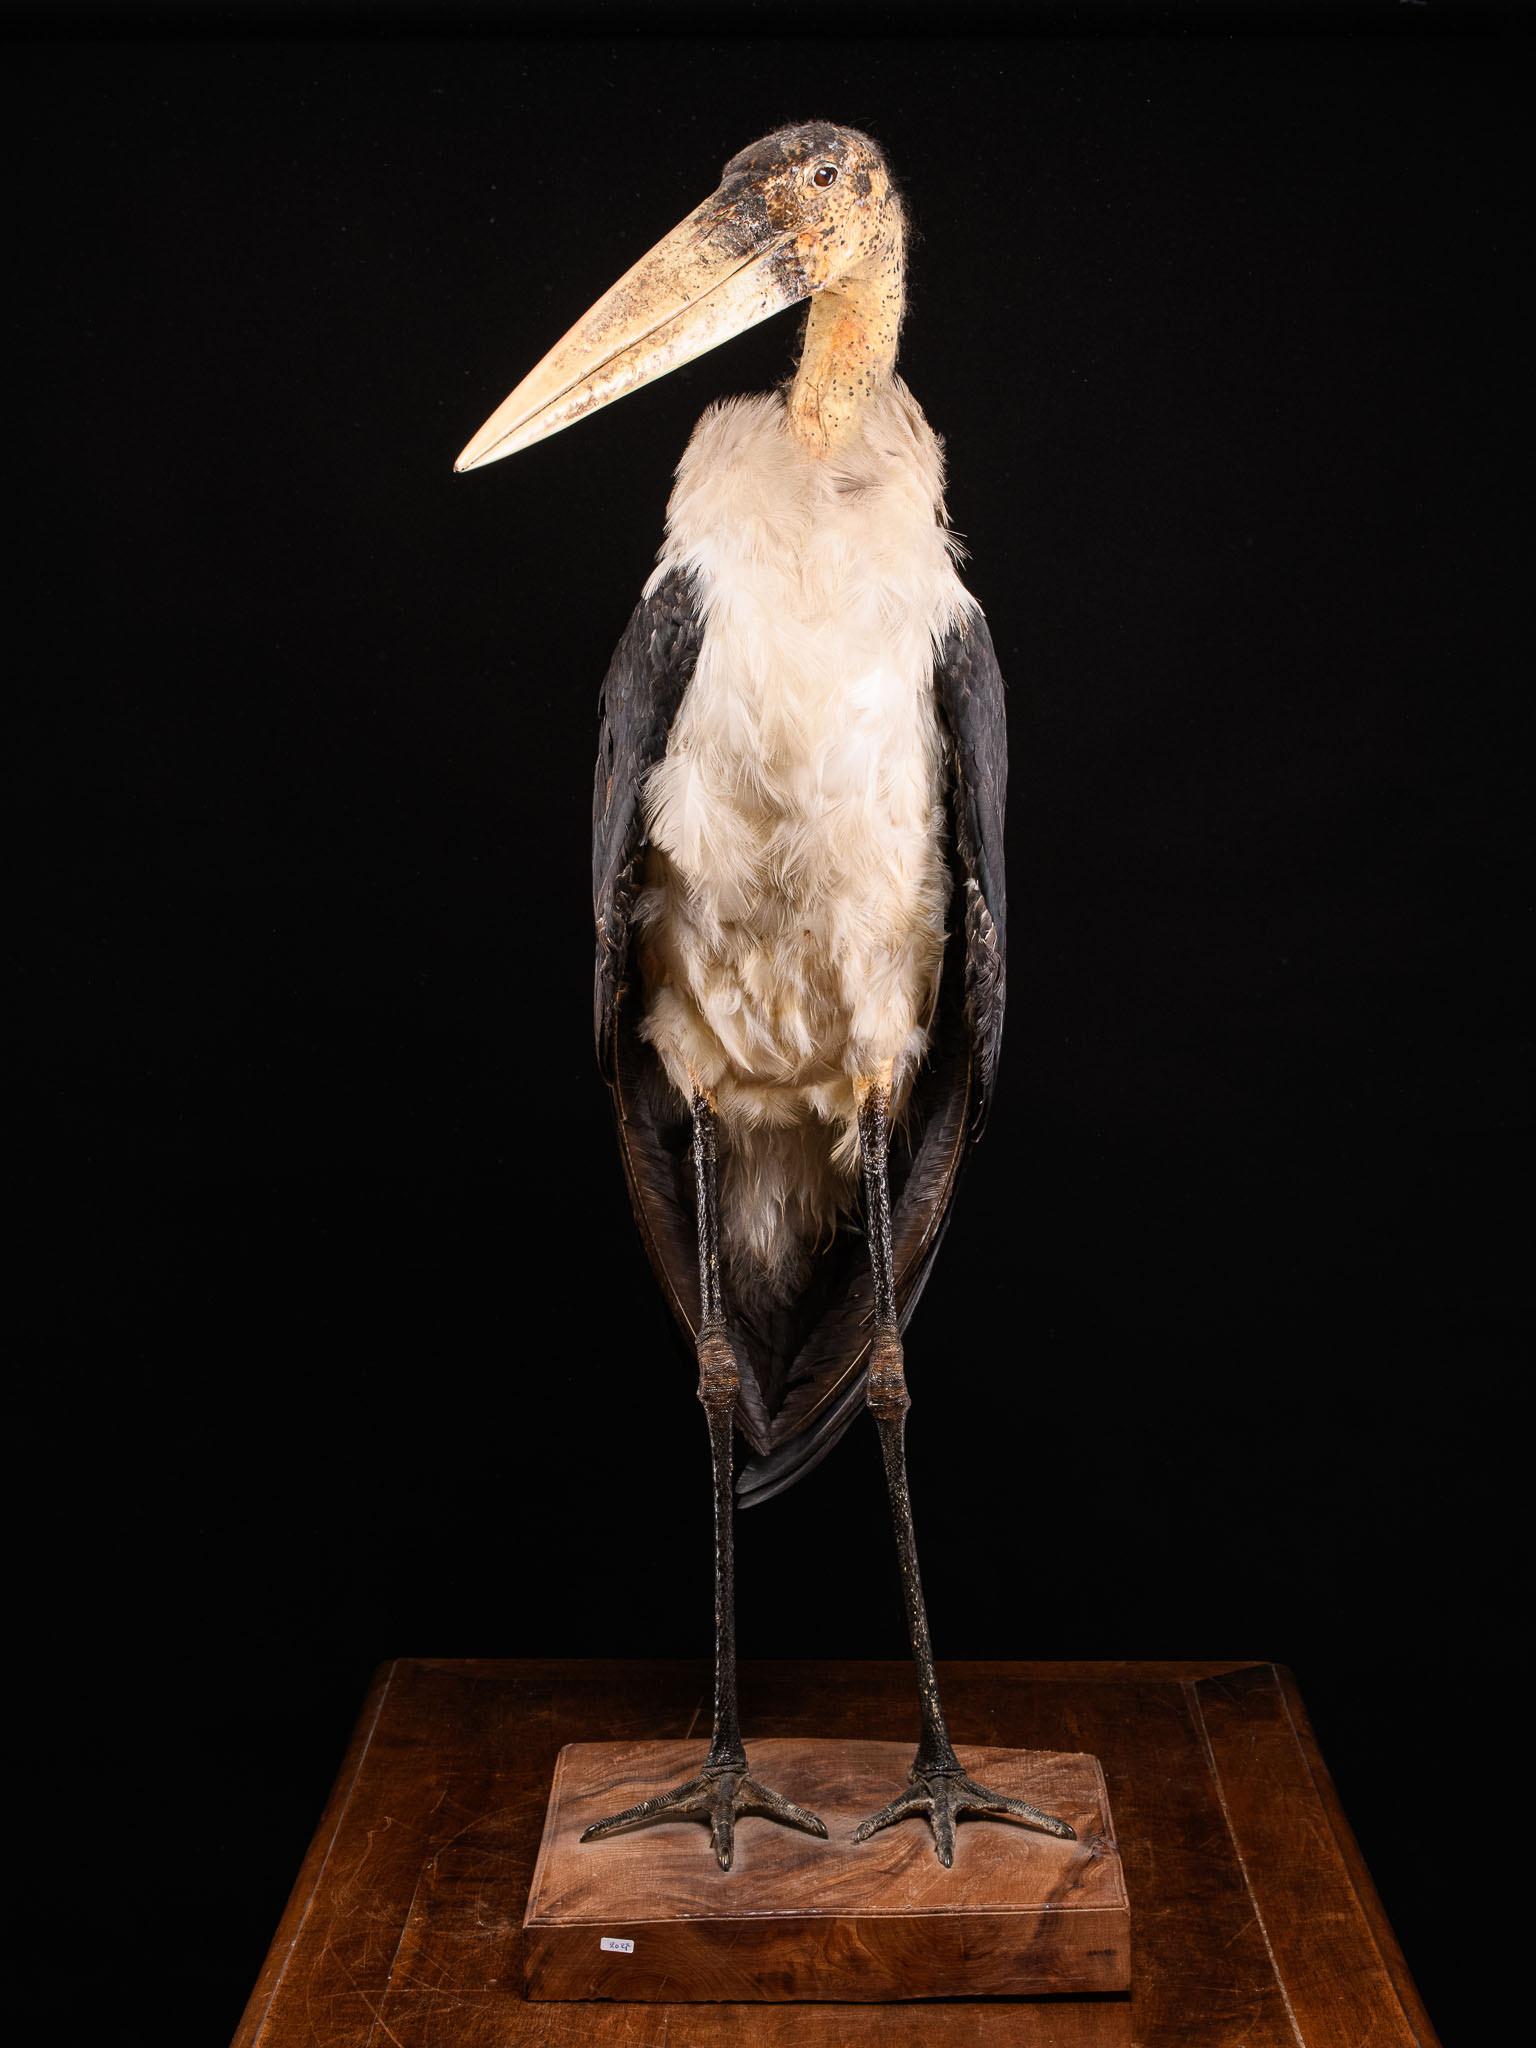 Marabou Stork taxidermy (Leptoptilos crumenifer (NR))

Bald-headed black and grey feathers with very long legs and a large triangular beak. Mounted in a walking position on a wooden base .Wings are folded back against its body. Walking straight with